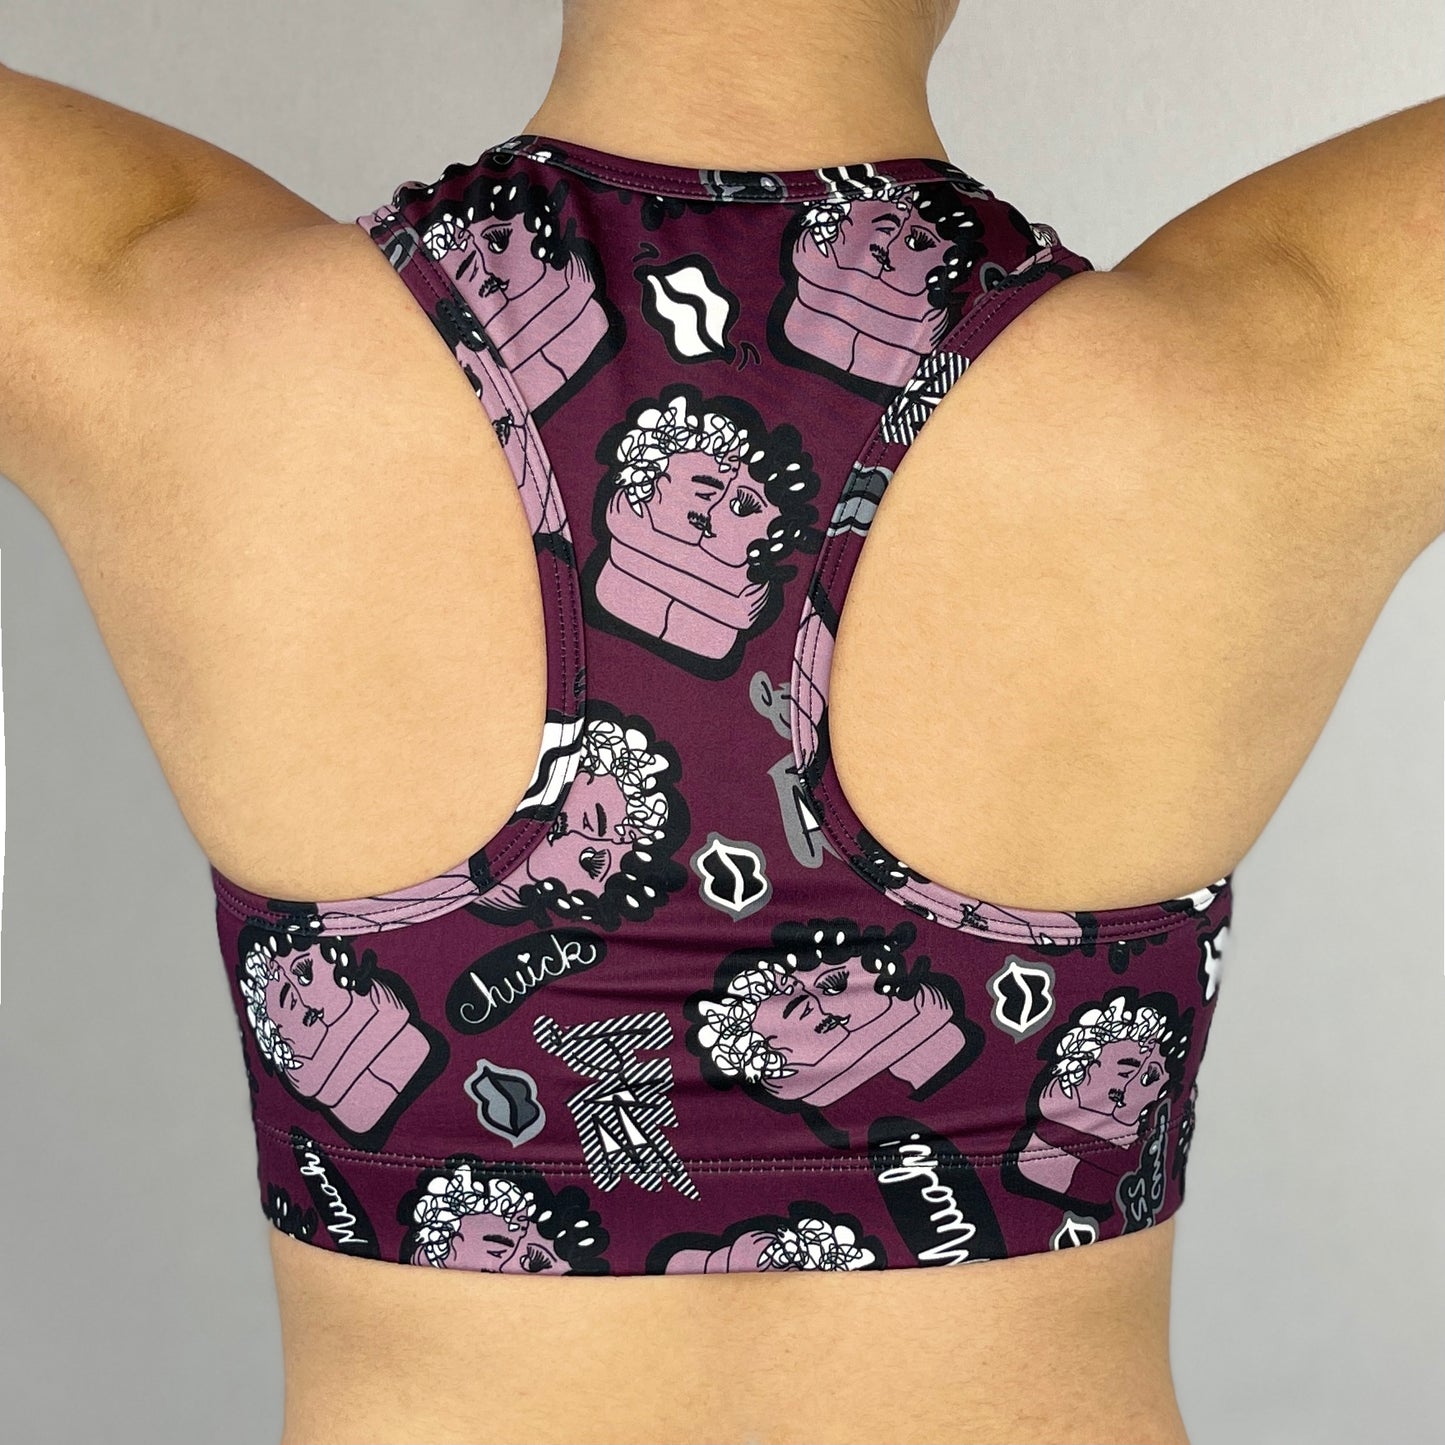 colourful sports bra made sustainably from recycled materials - Purple, the kiss